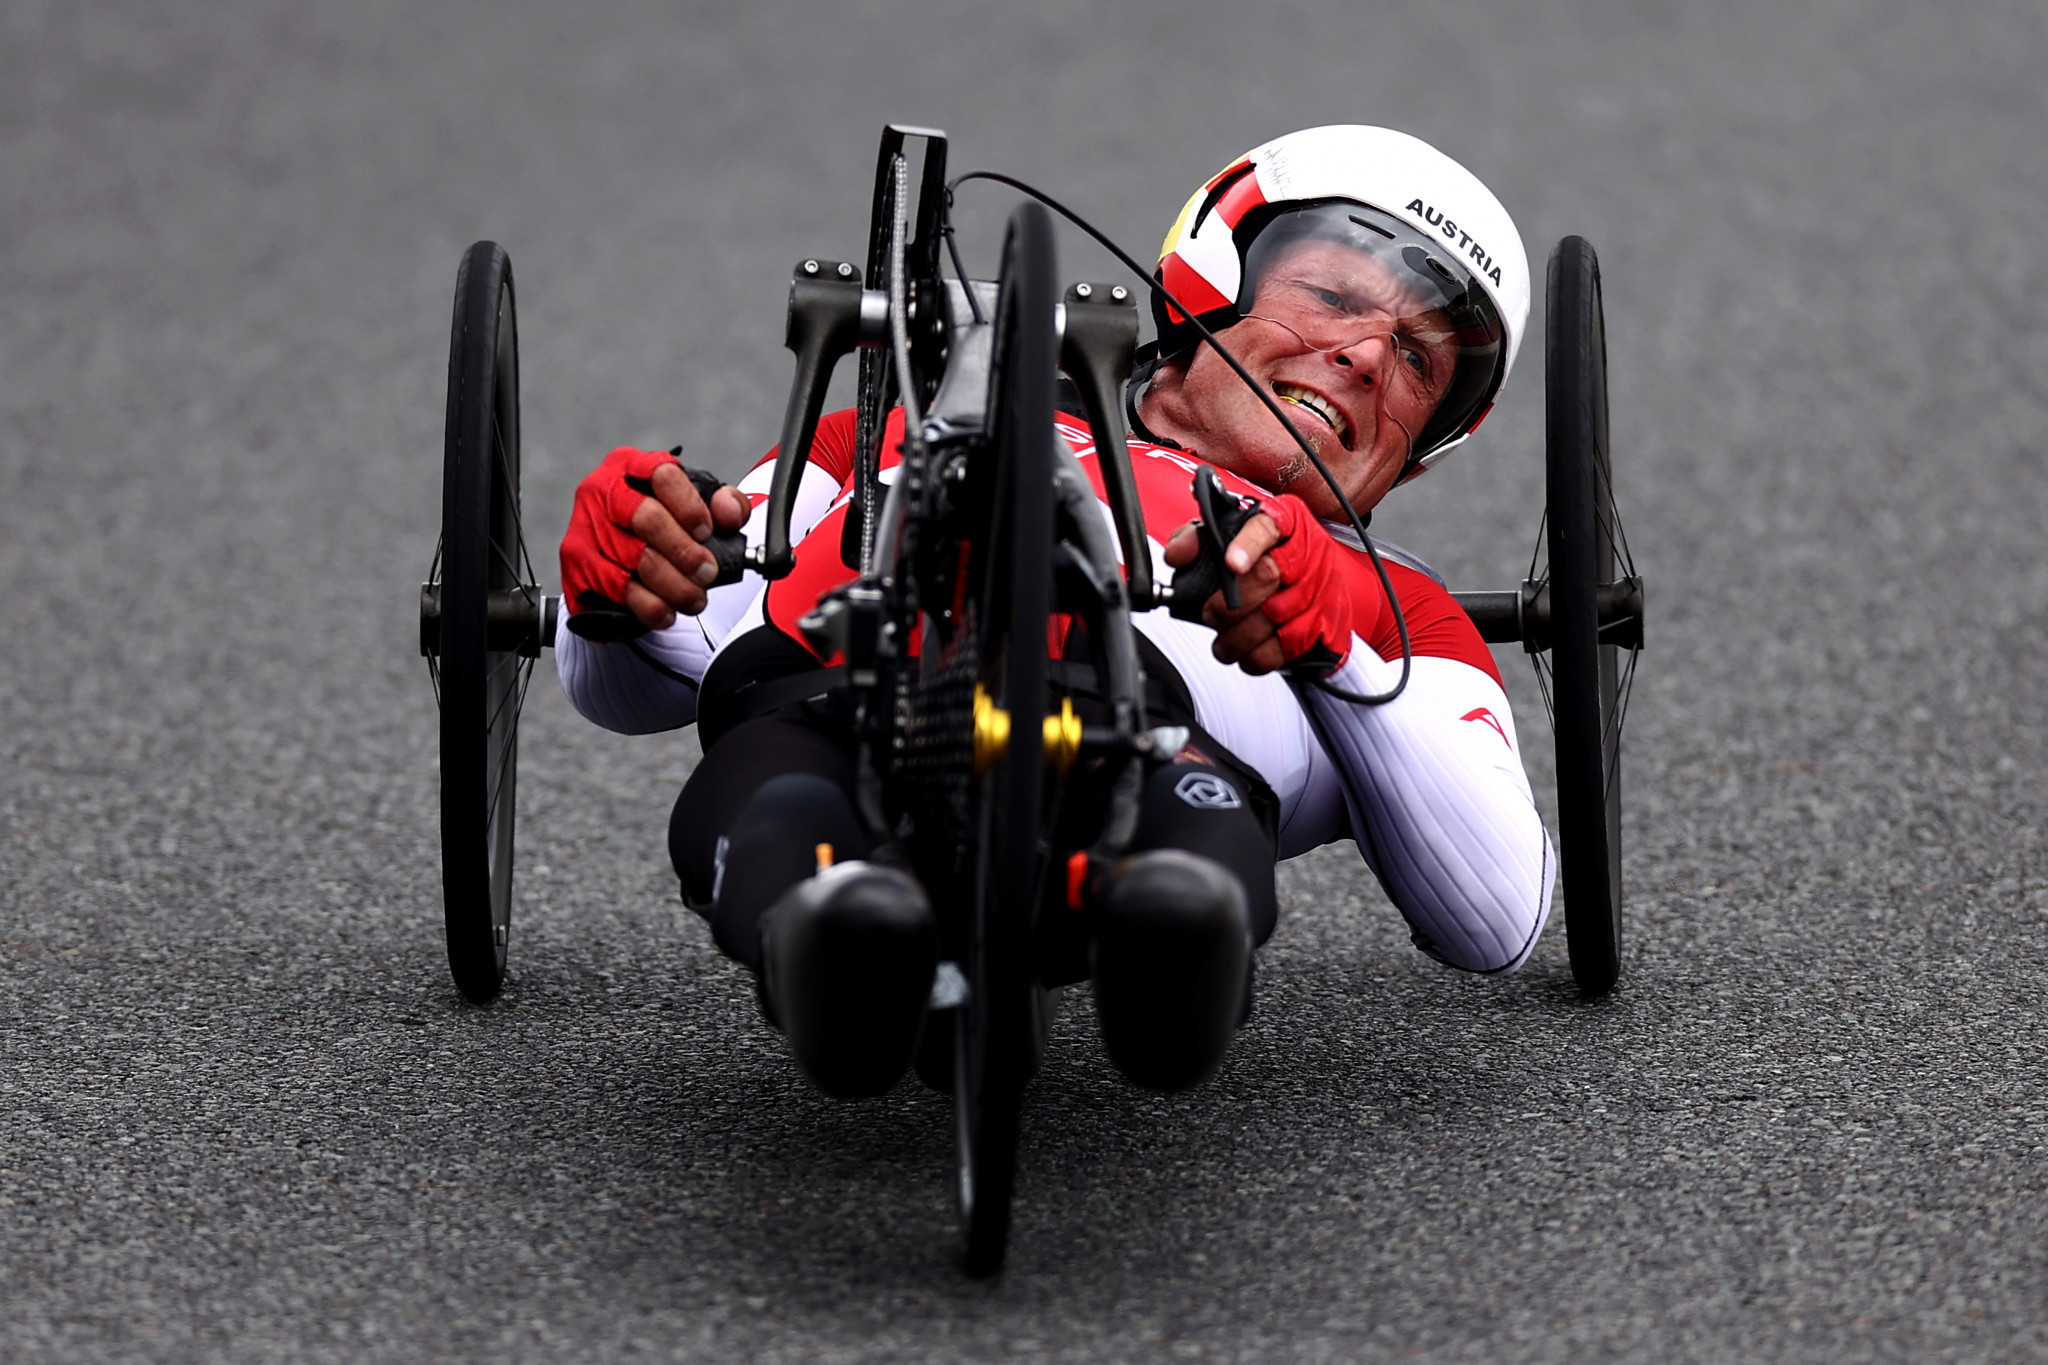 Walter Ablinger won Austria's only gold medal at he Tokyo 2020 Paralympics ©Getty Images